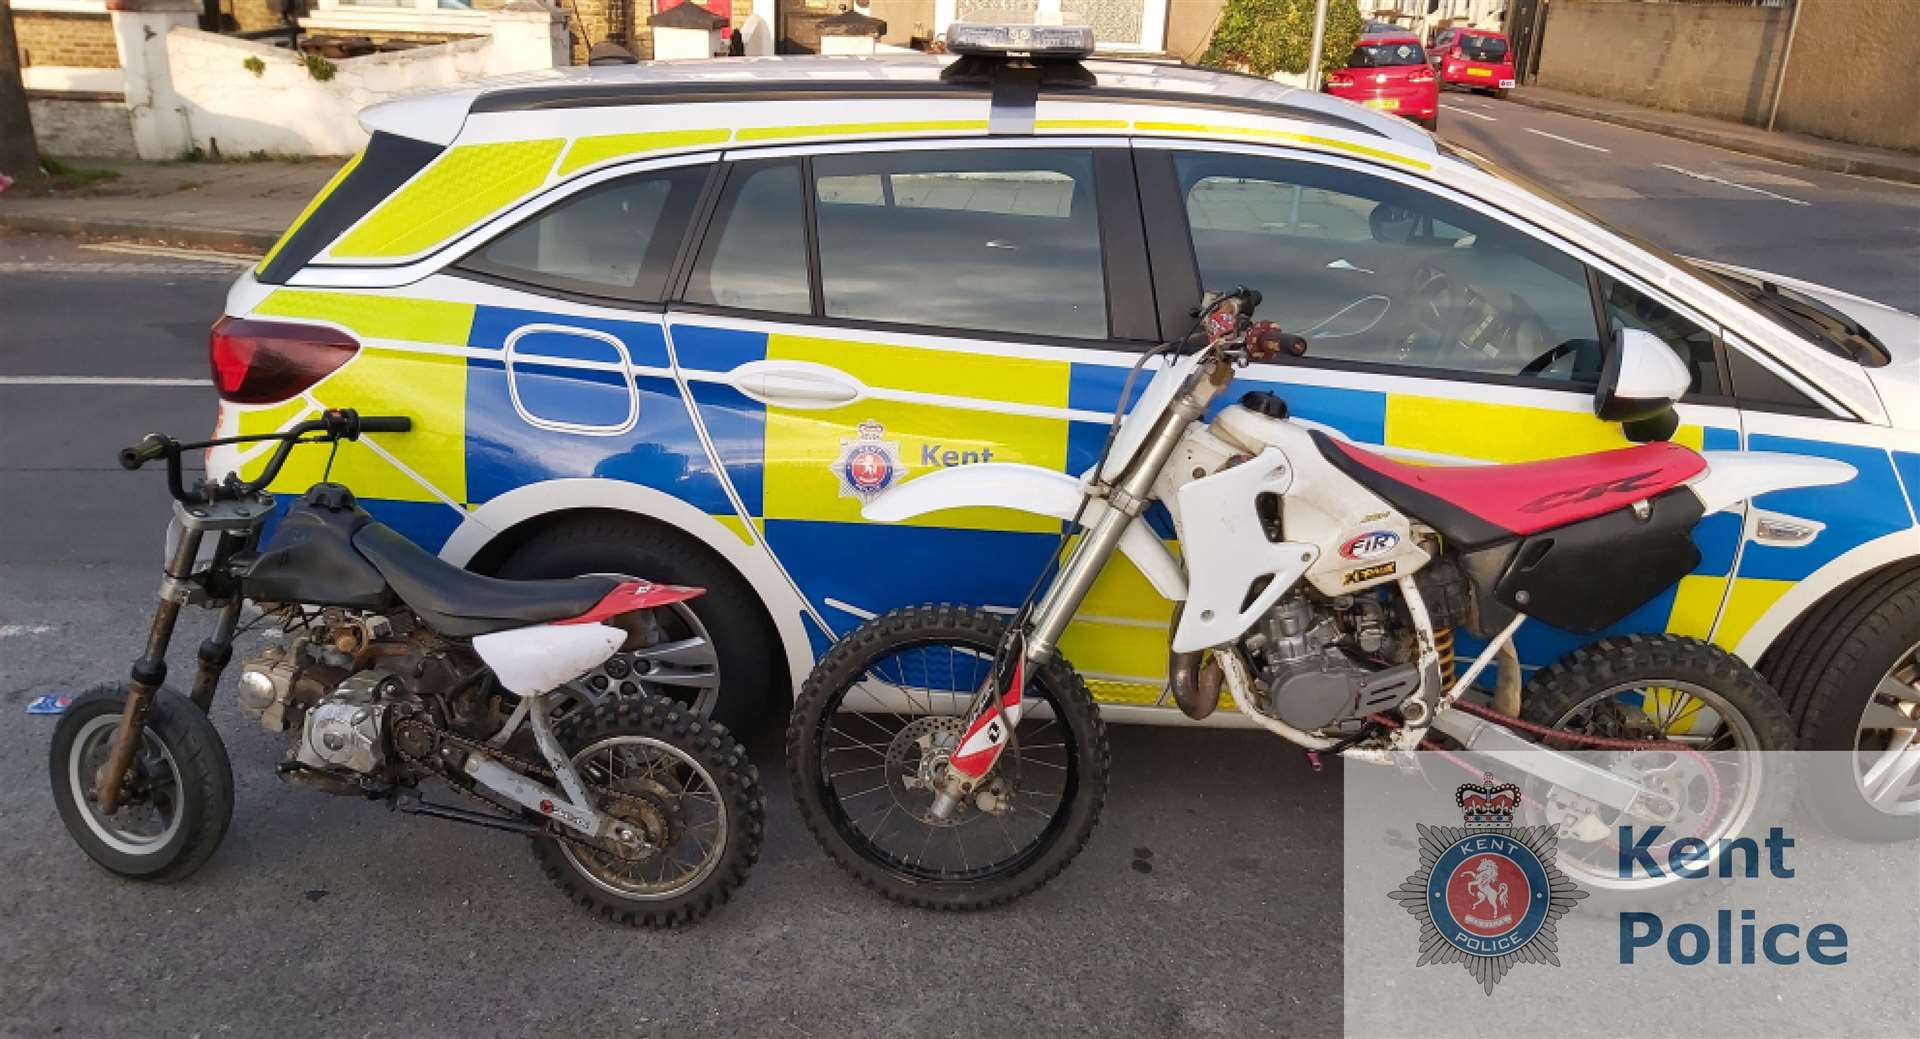 Bike's seized by officers across Maidstone and Medway